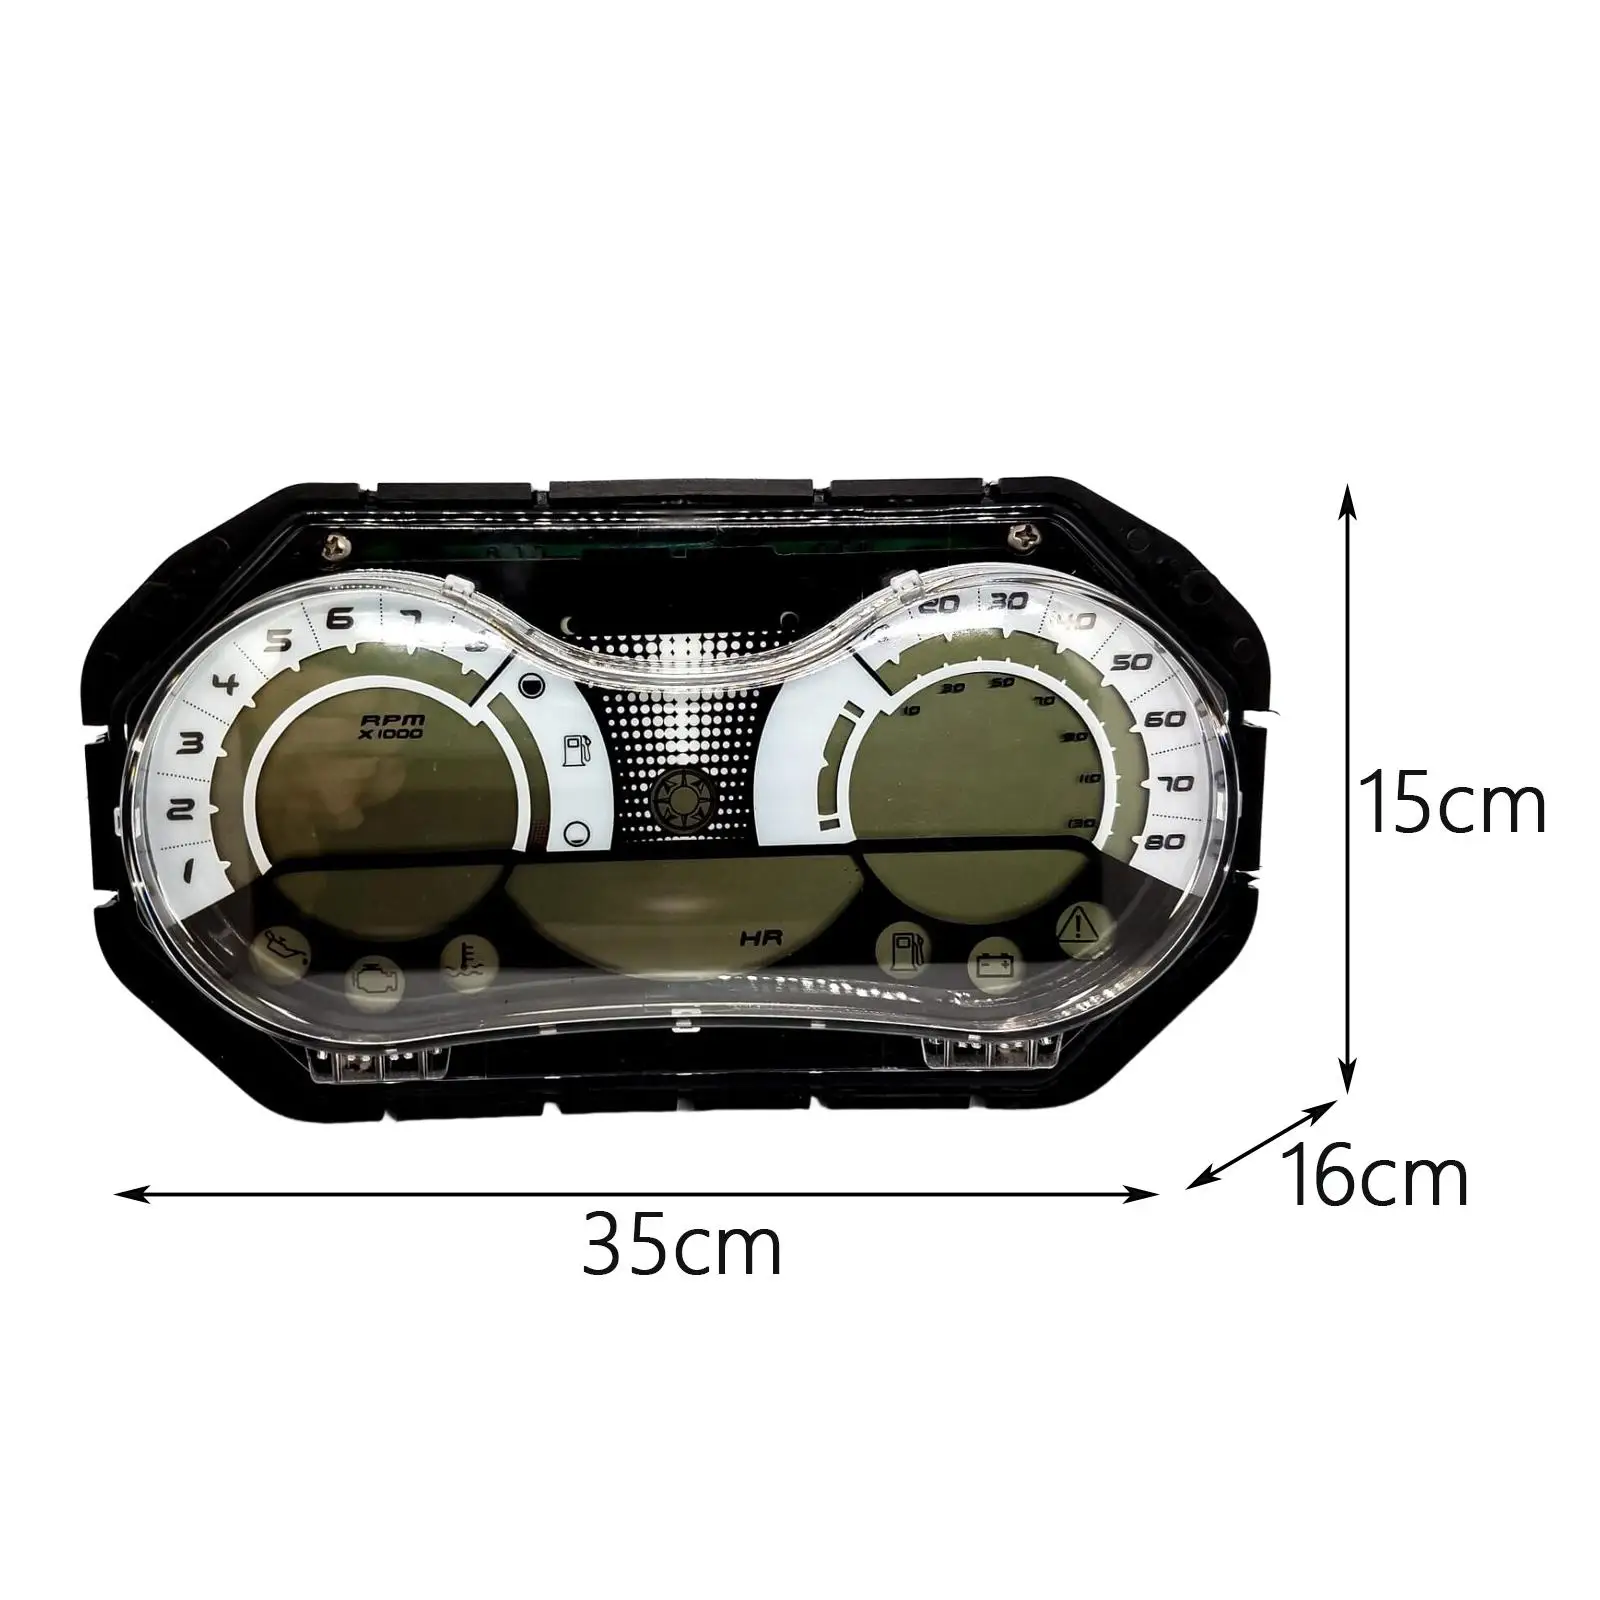 Digital LCD Brp Speedometer 278002270 Gauge Cluster Replacement for Seadoo Rxp-x Wake GTX High Quality Accessories